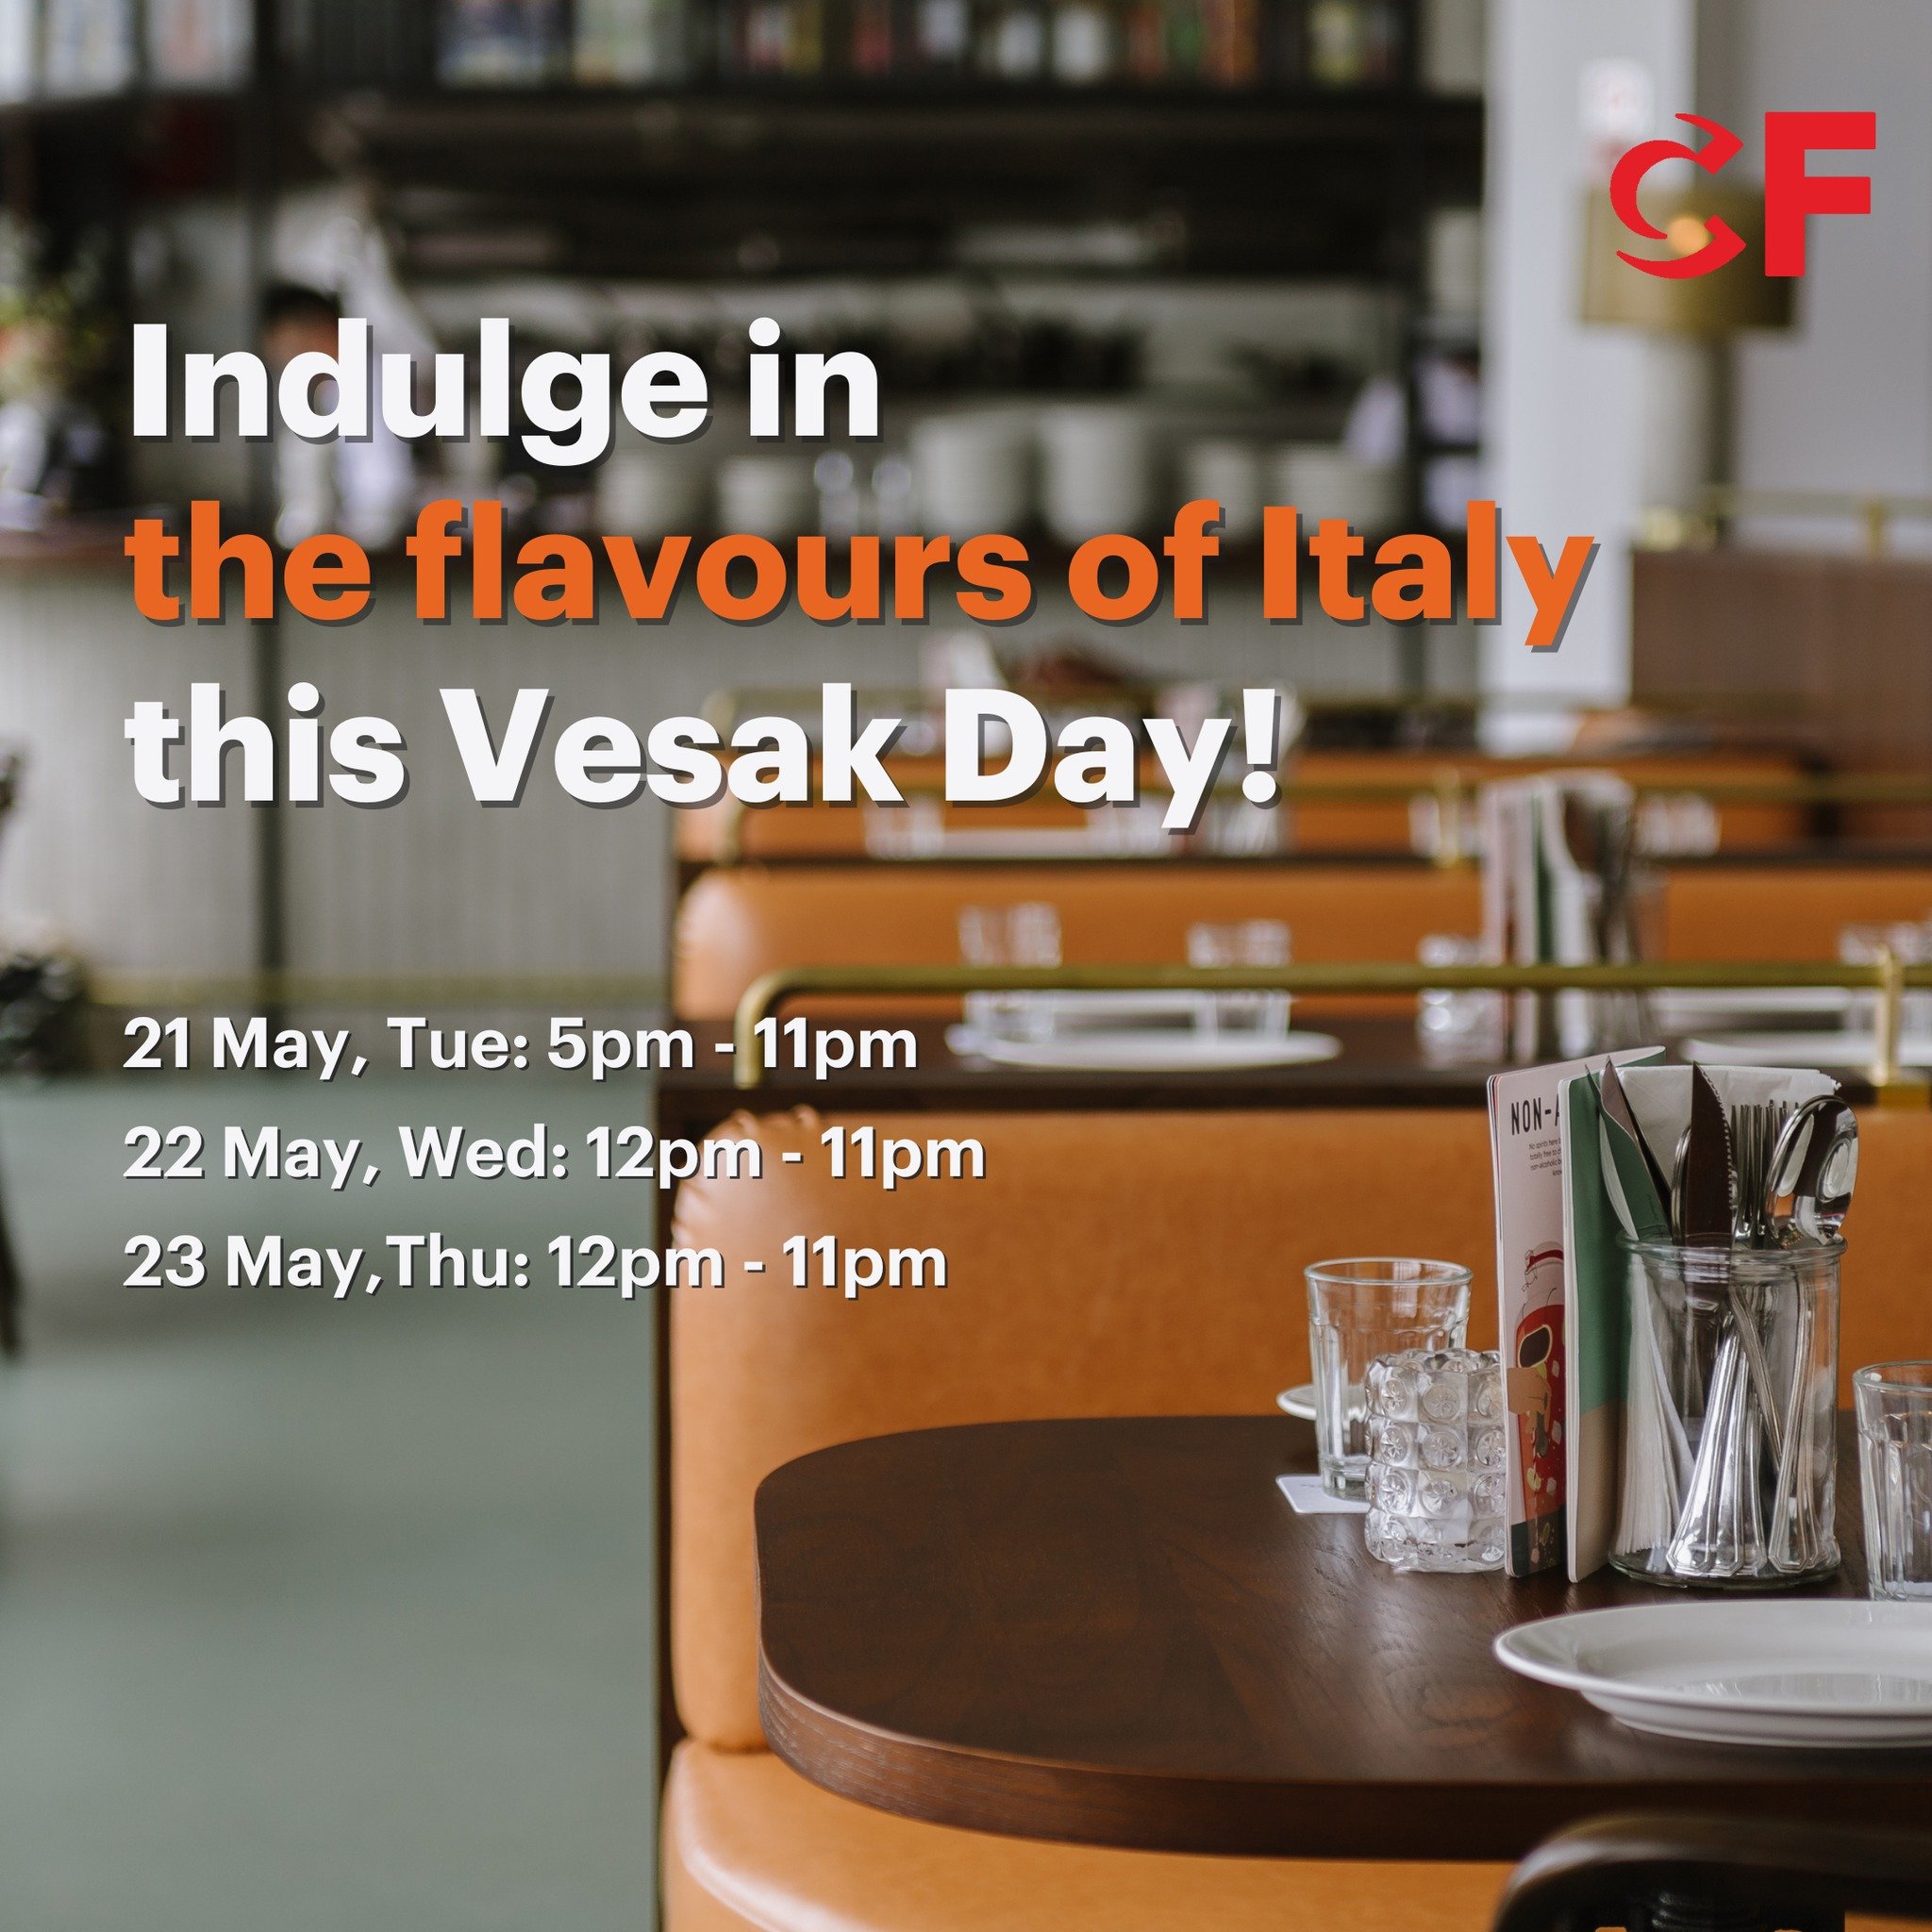 Buon Appetito! Savour every bite of the Italian experience with an afternoon spread this Vesak Day, 22 May!

Caffe Fernet will be open from 12pm, so bring the whole family and indulge in a delicious lunch by the bay. Don't miss our Seafood Riviera sp